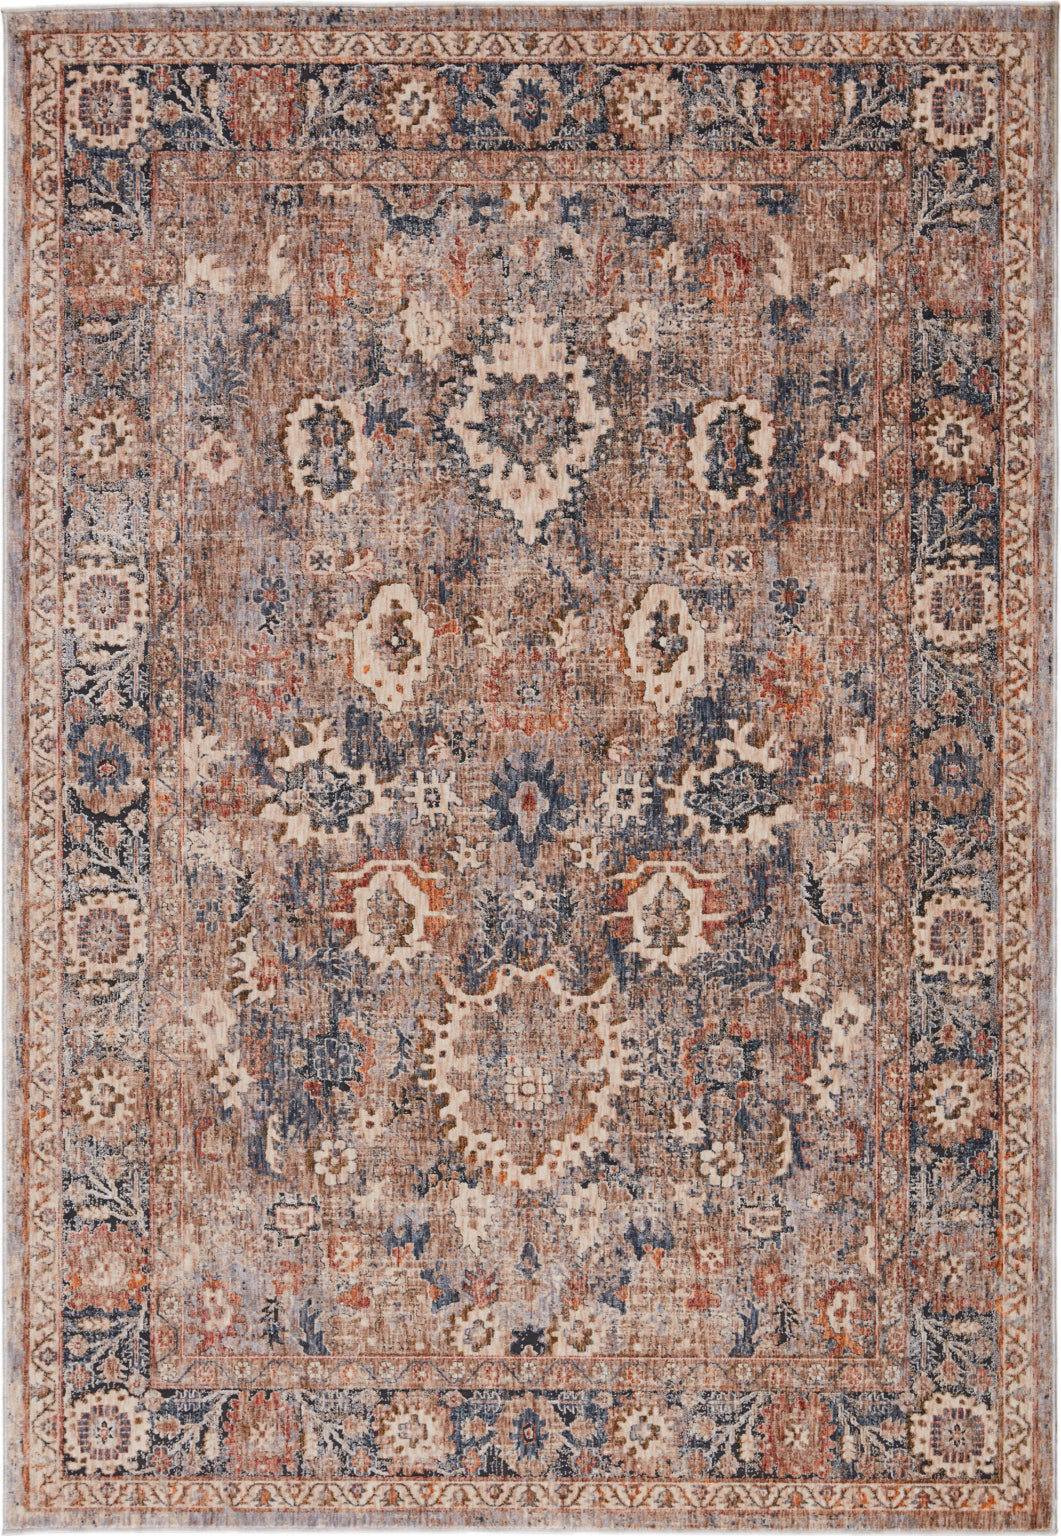 Jaipur Living Vanadey Inari VND02 Light Taupe/Blue Area Rug by Vibe Main Image